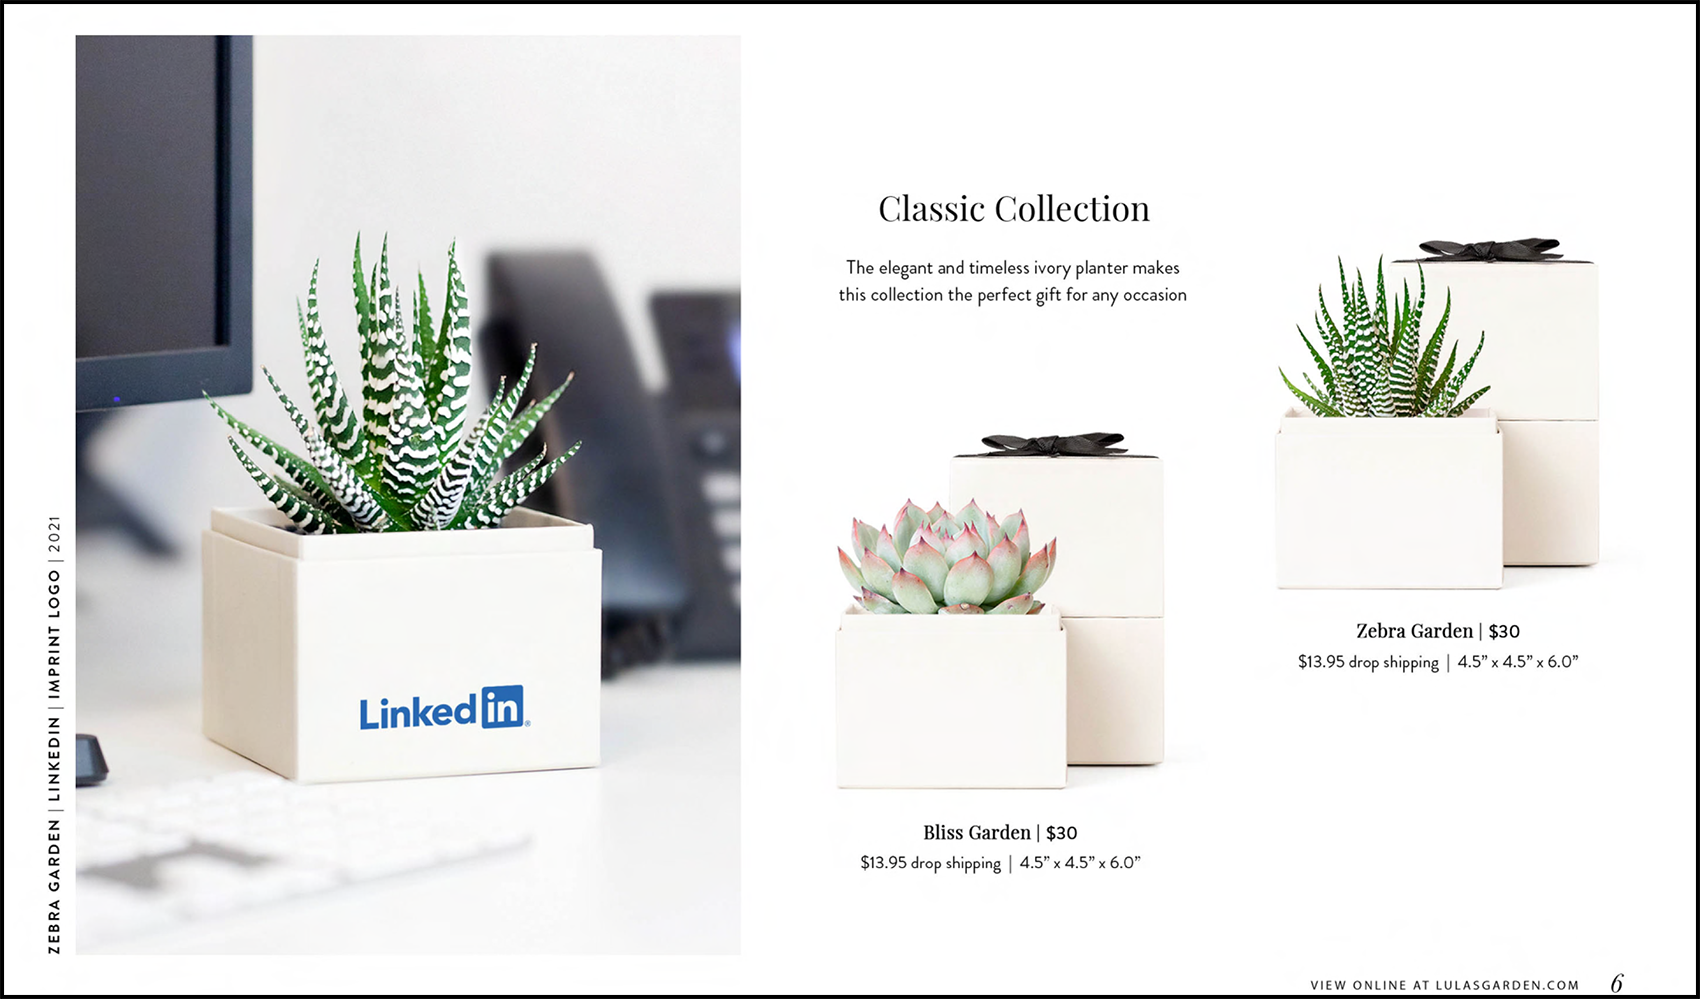 These are examples of succulent gifts from the corporate gifting company Lula’s Garden. The classic collection includes Bliss and Zebra plants.